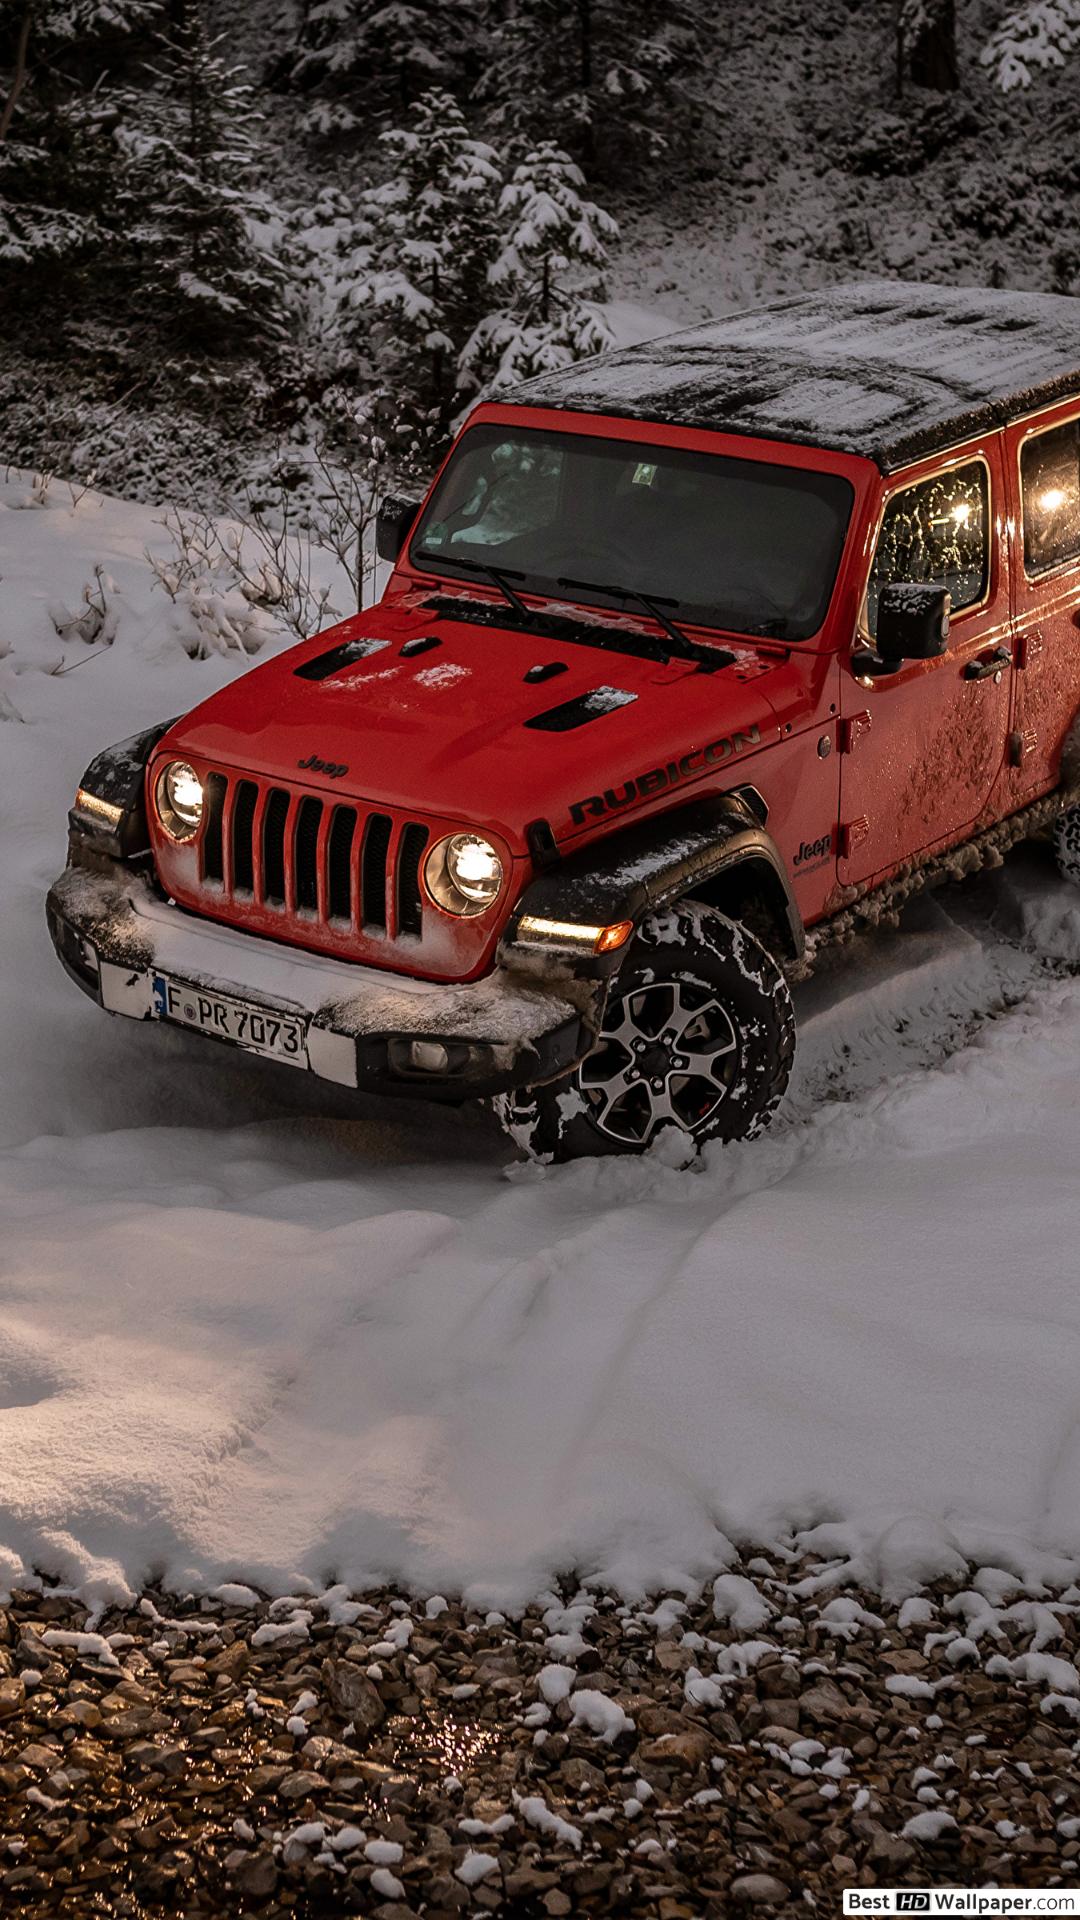 Wrangler Unlimited Rubicon red jeep HD wallpaper download